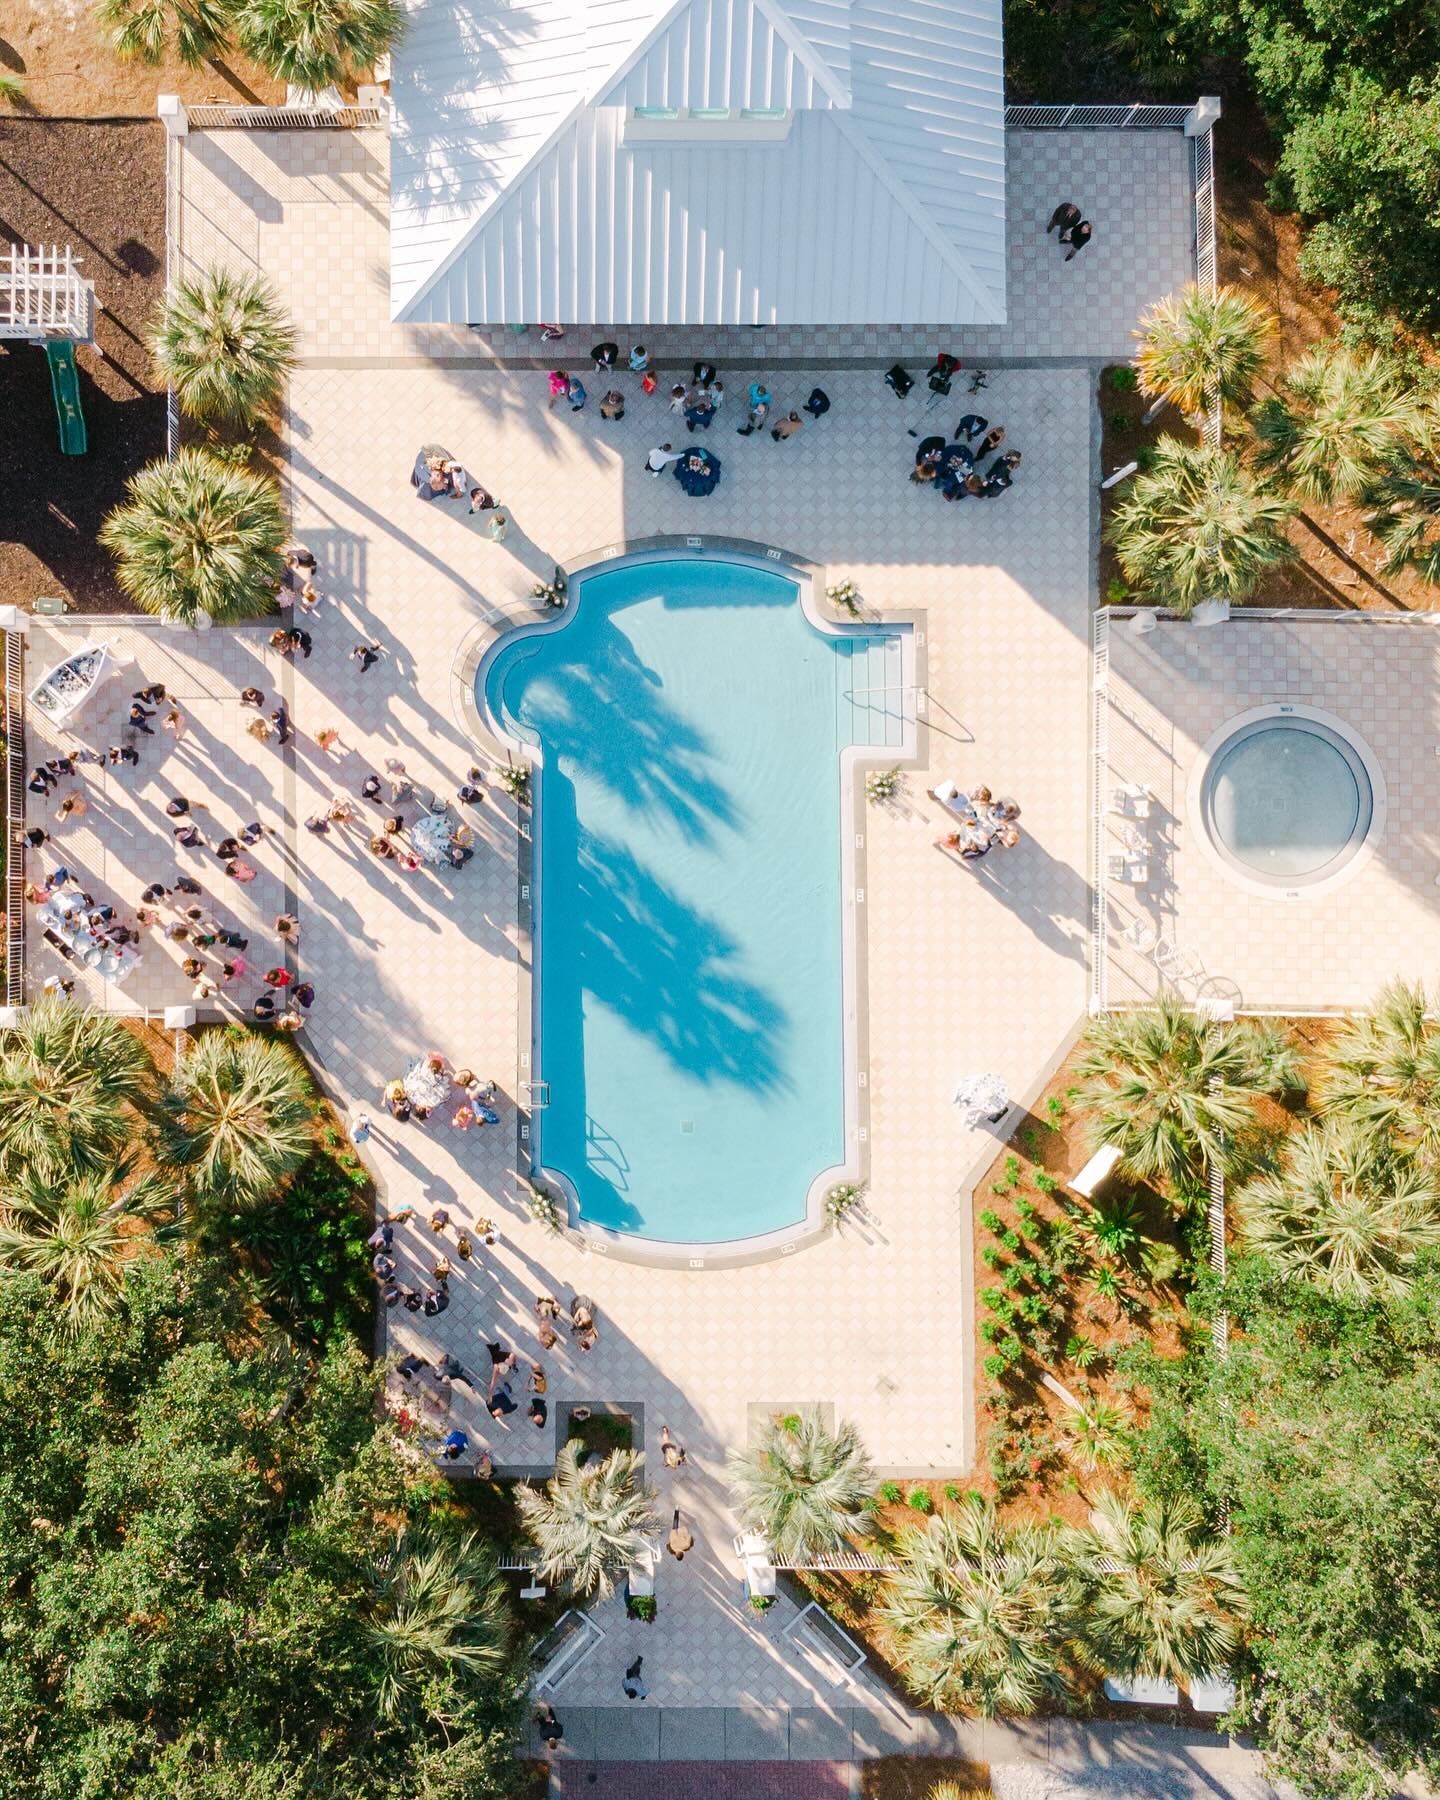 Experience your wedding from unique perspectives with breathtaking aerial views! 🚁 
A special thanks to @jessiebarksdalephotography for capturing the magic from every angle.

#weddingplanning #weddingplanner #droneshot #weddingdrone #weddingdronepho